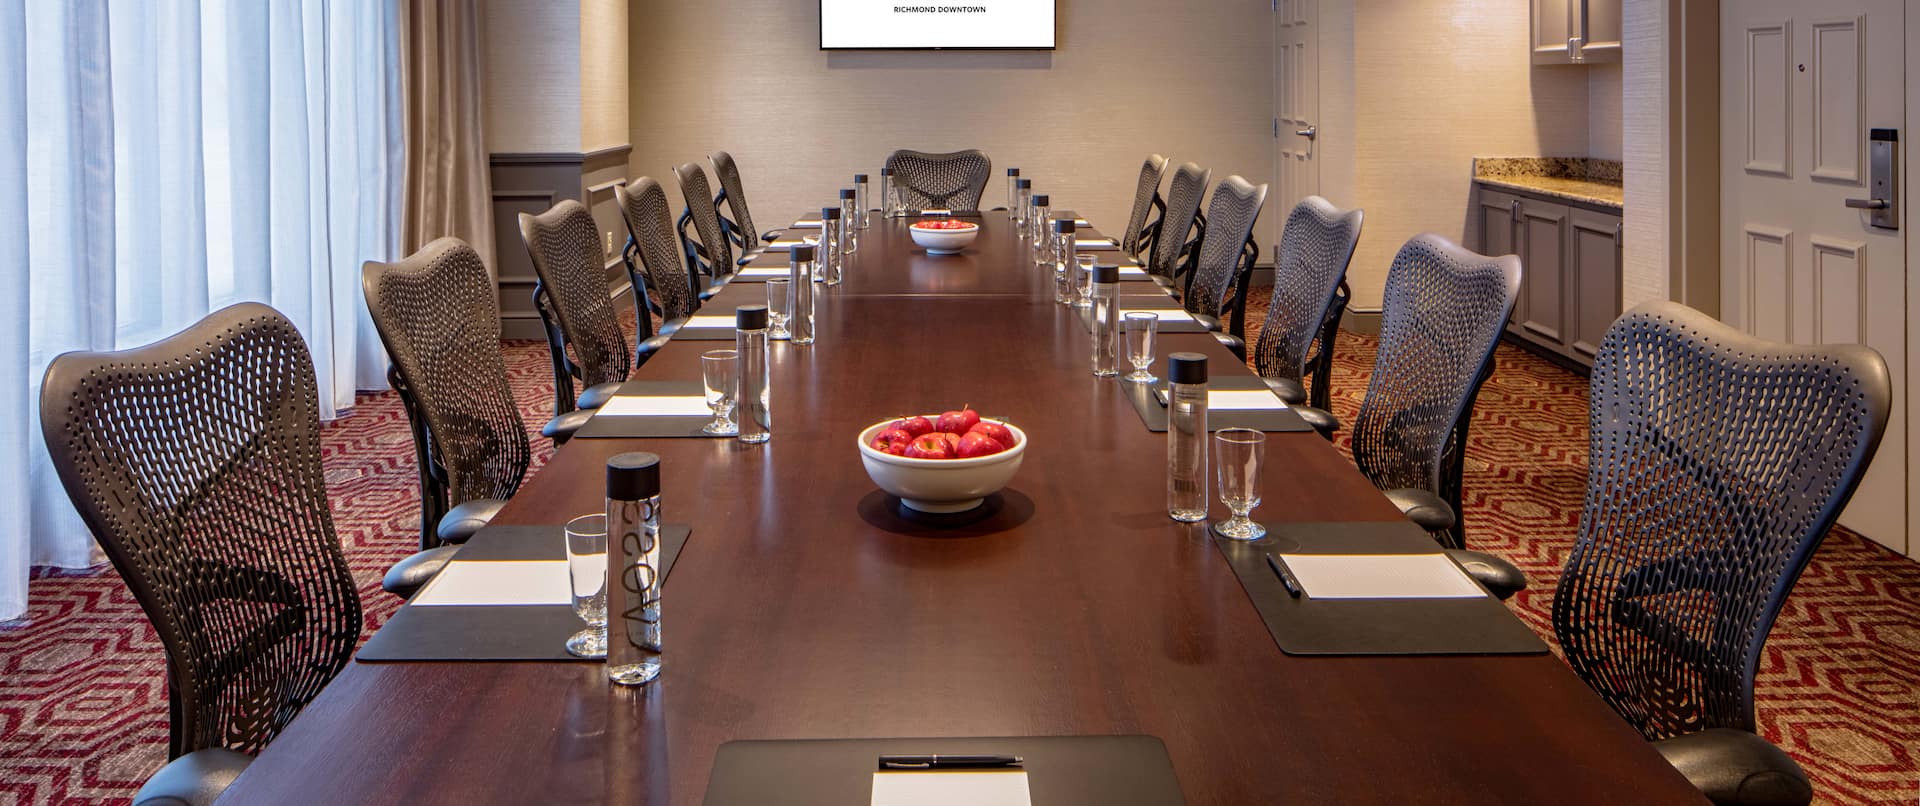 Boardroom With Room Technology 